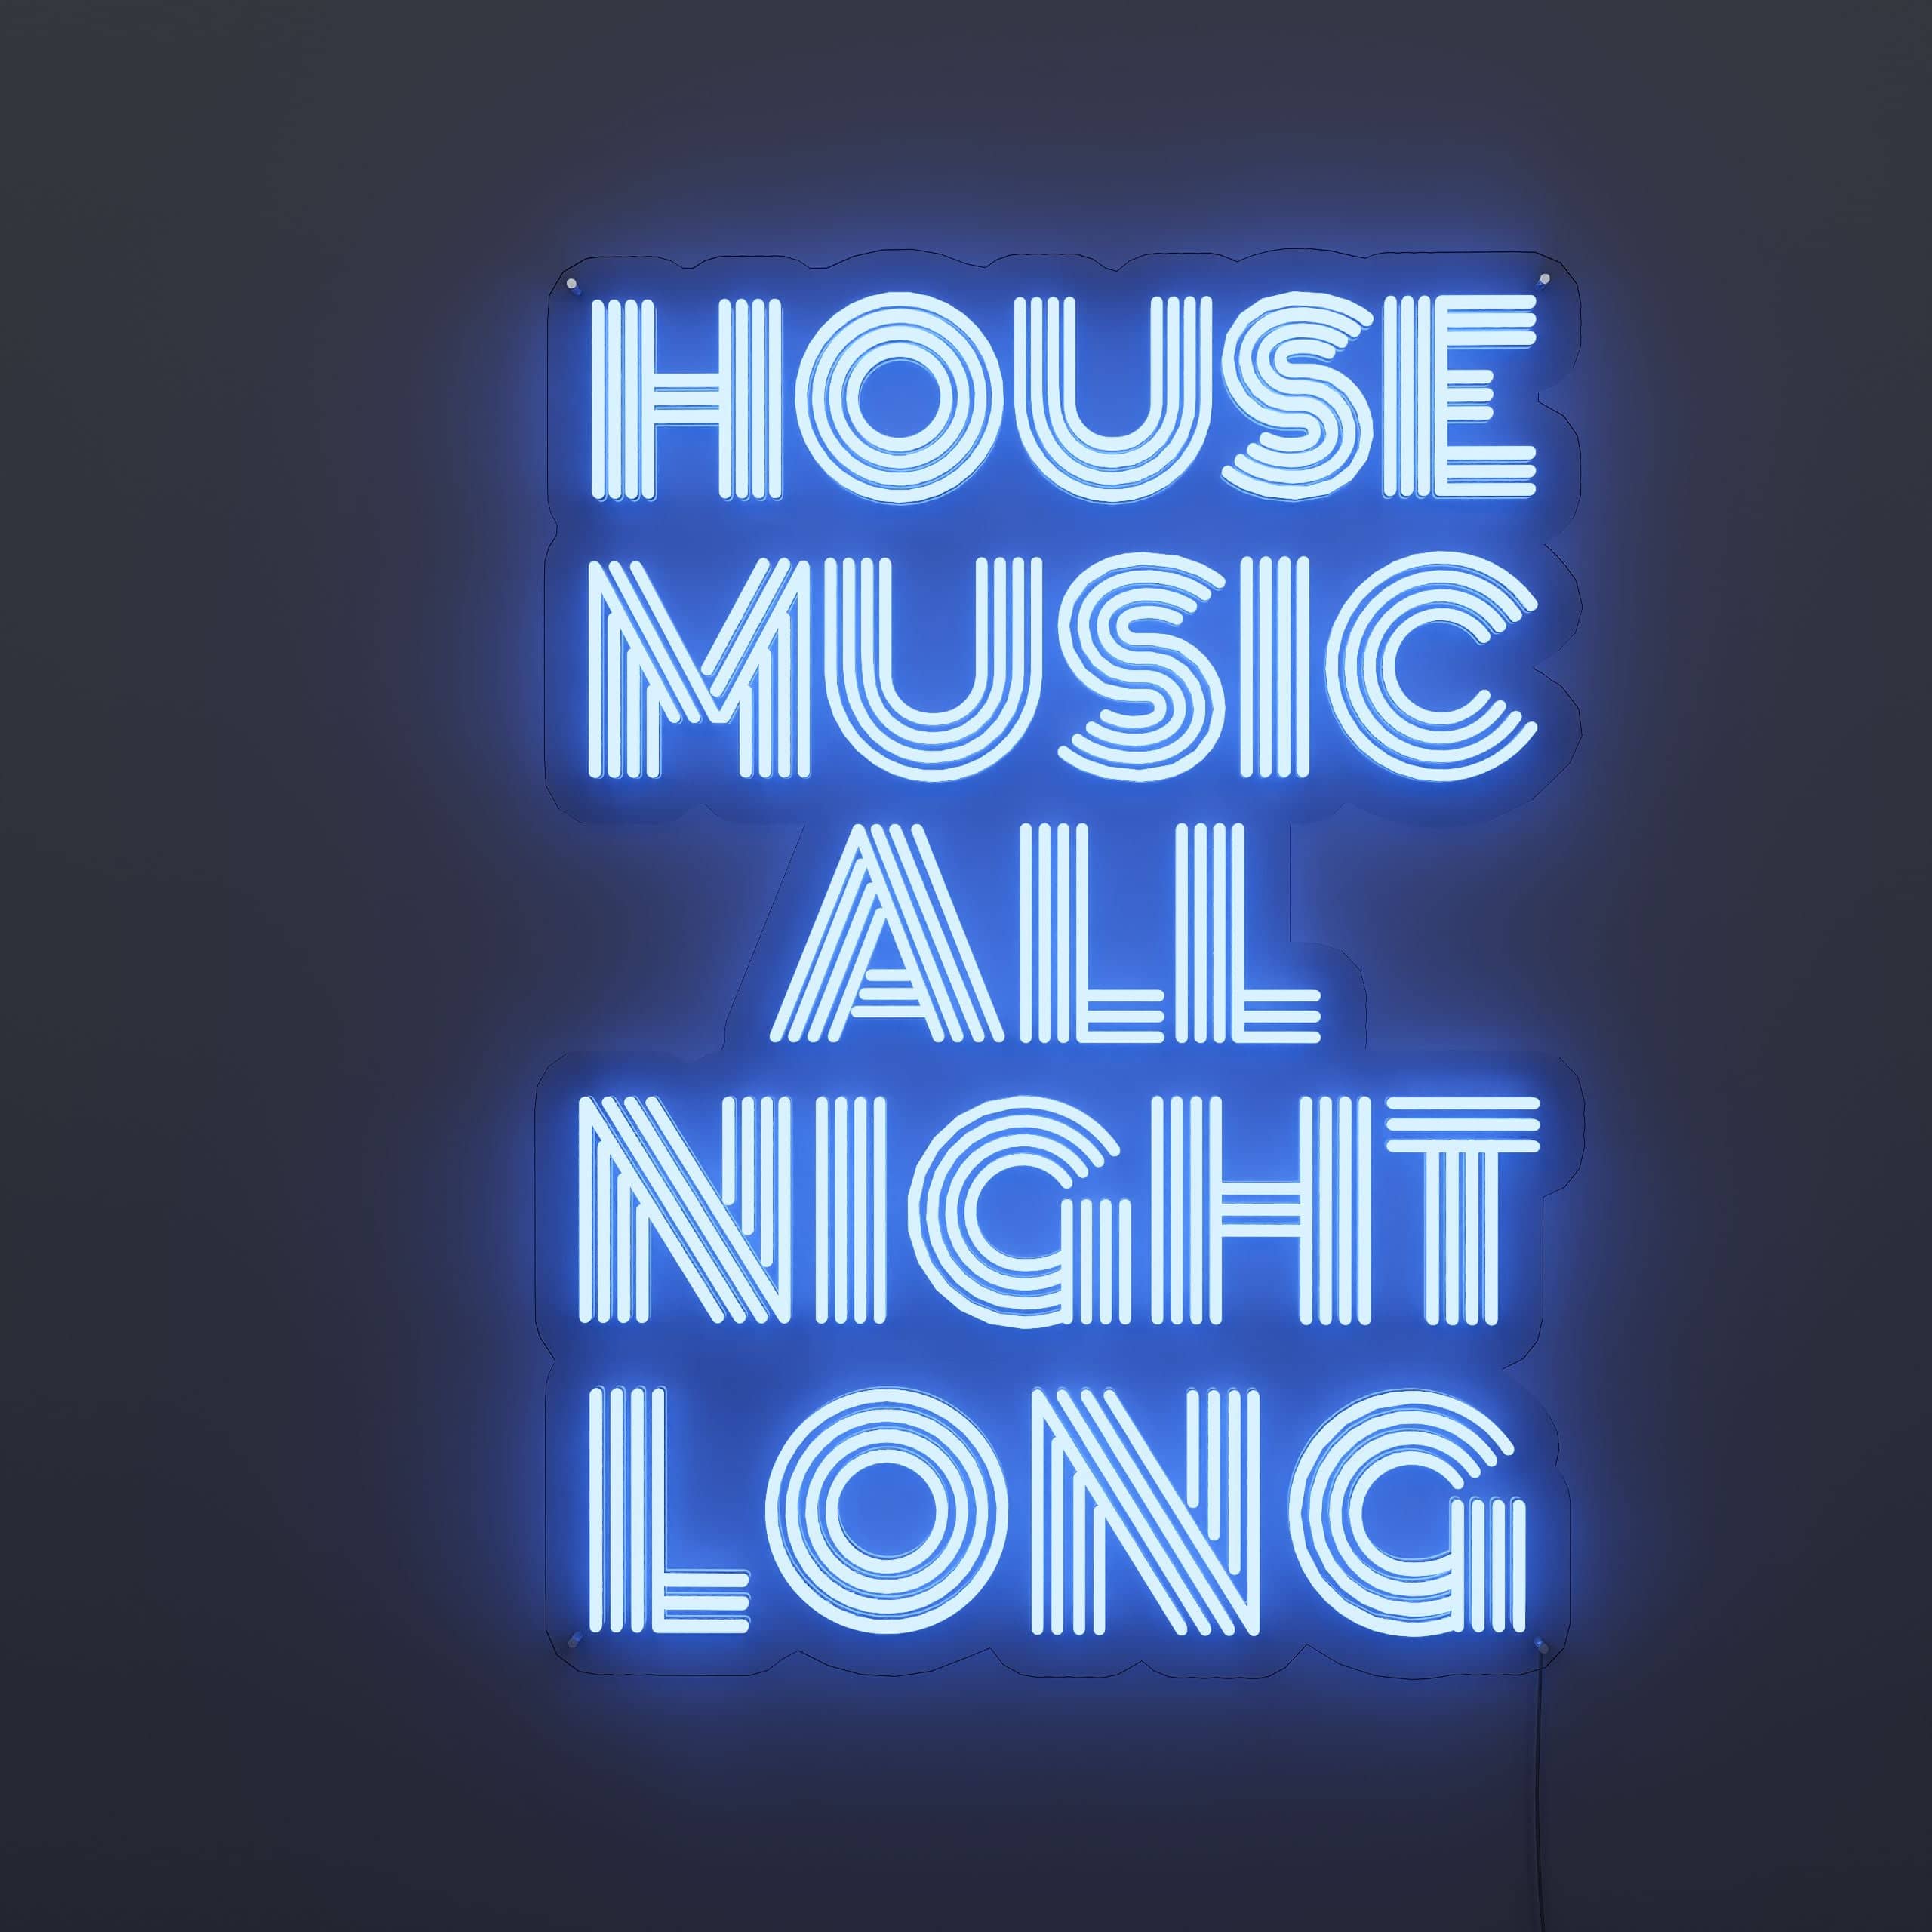 play-house-music-nightly-neon-sign-lite